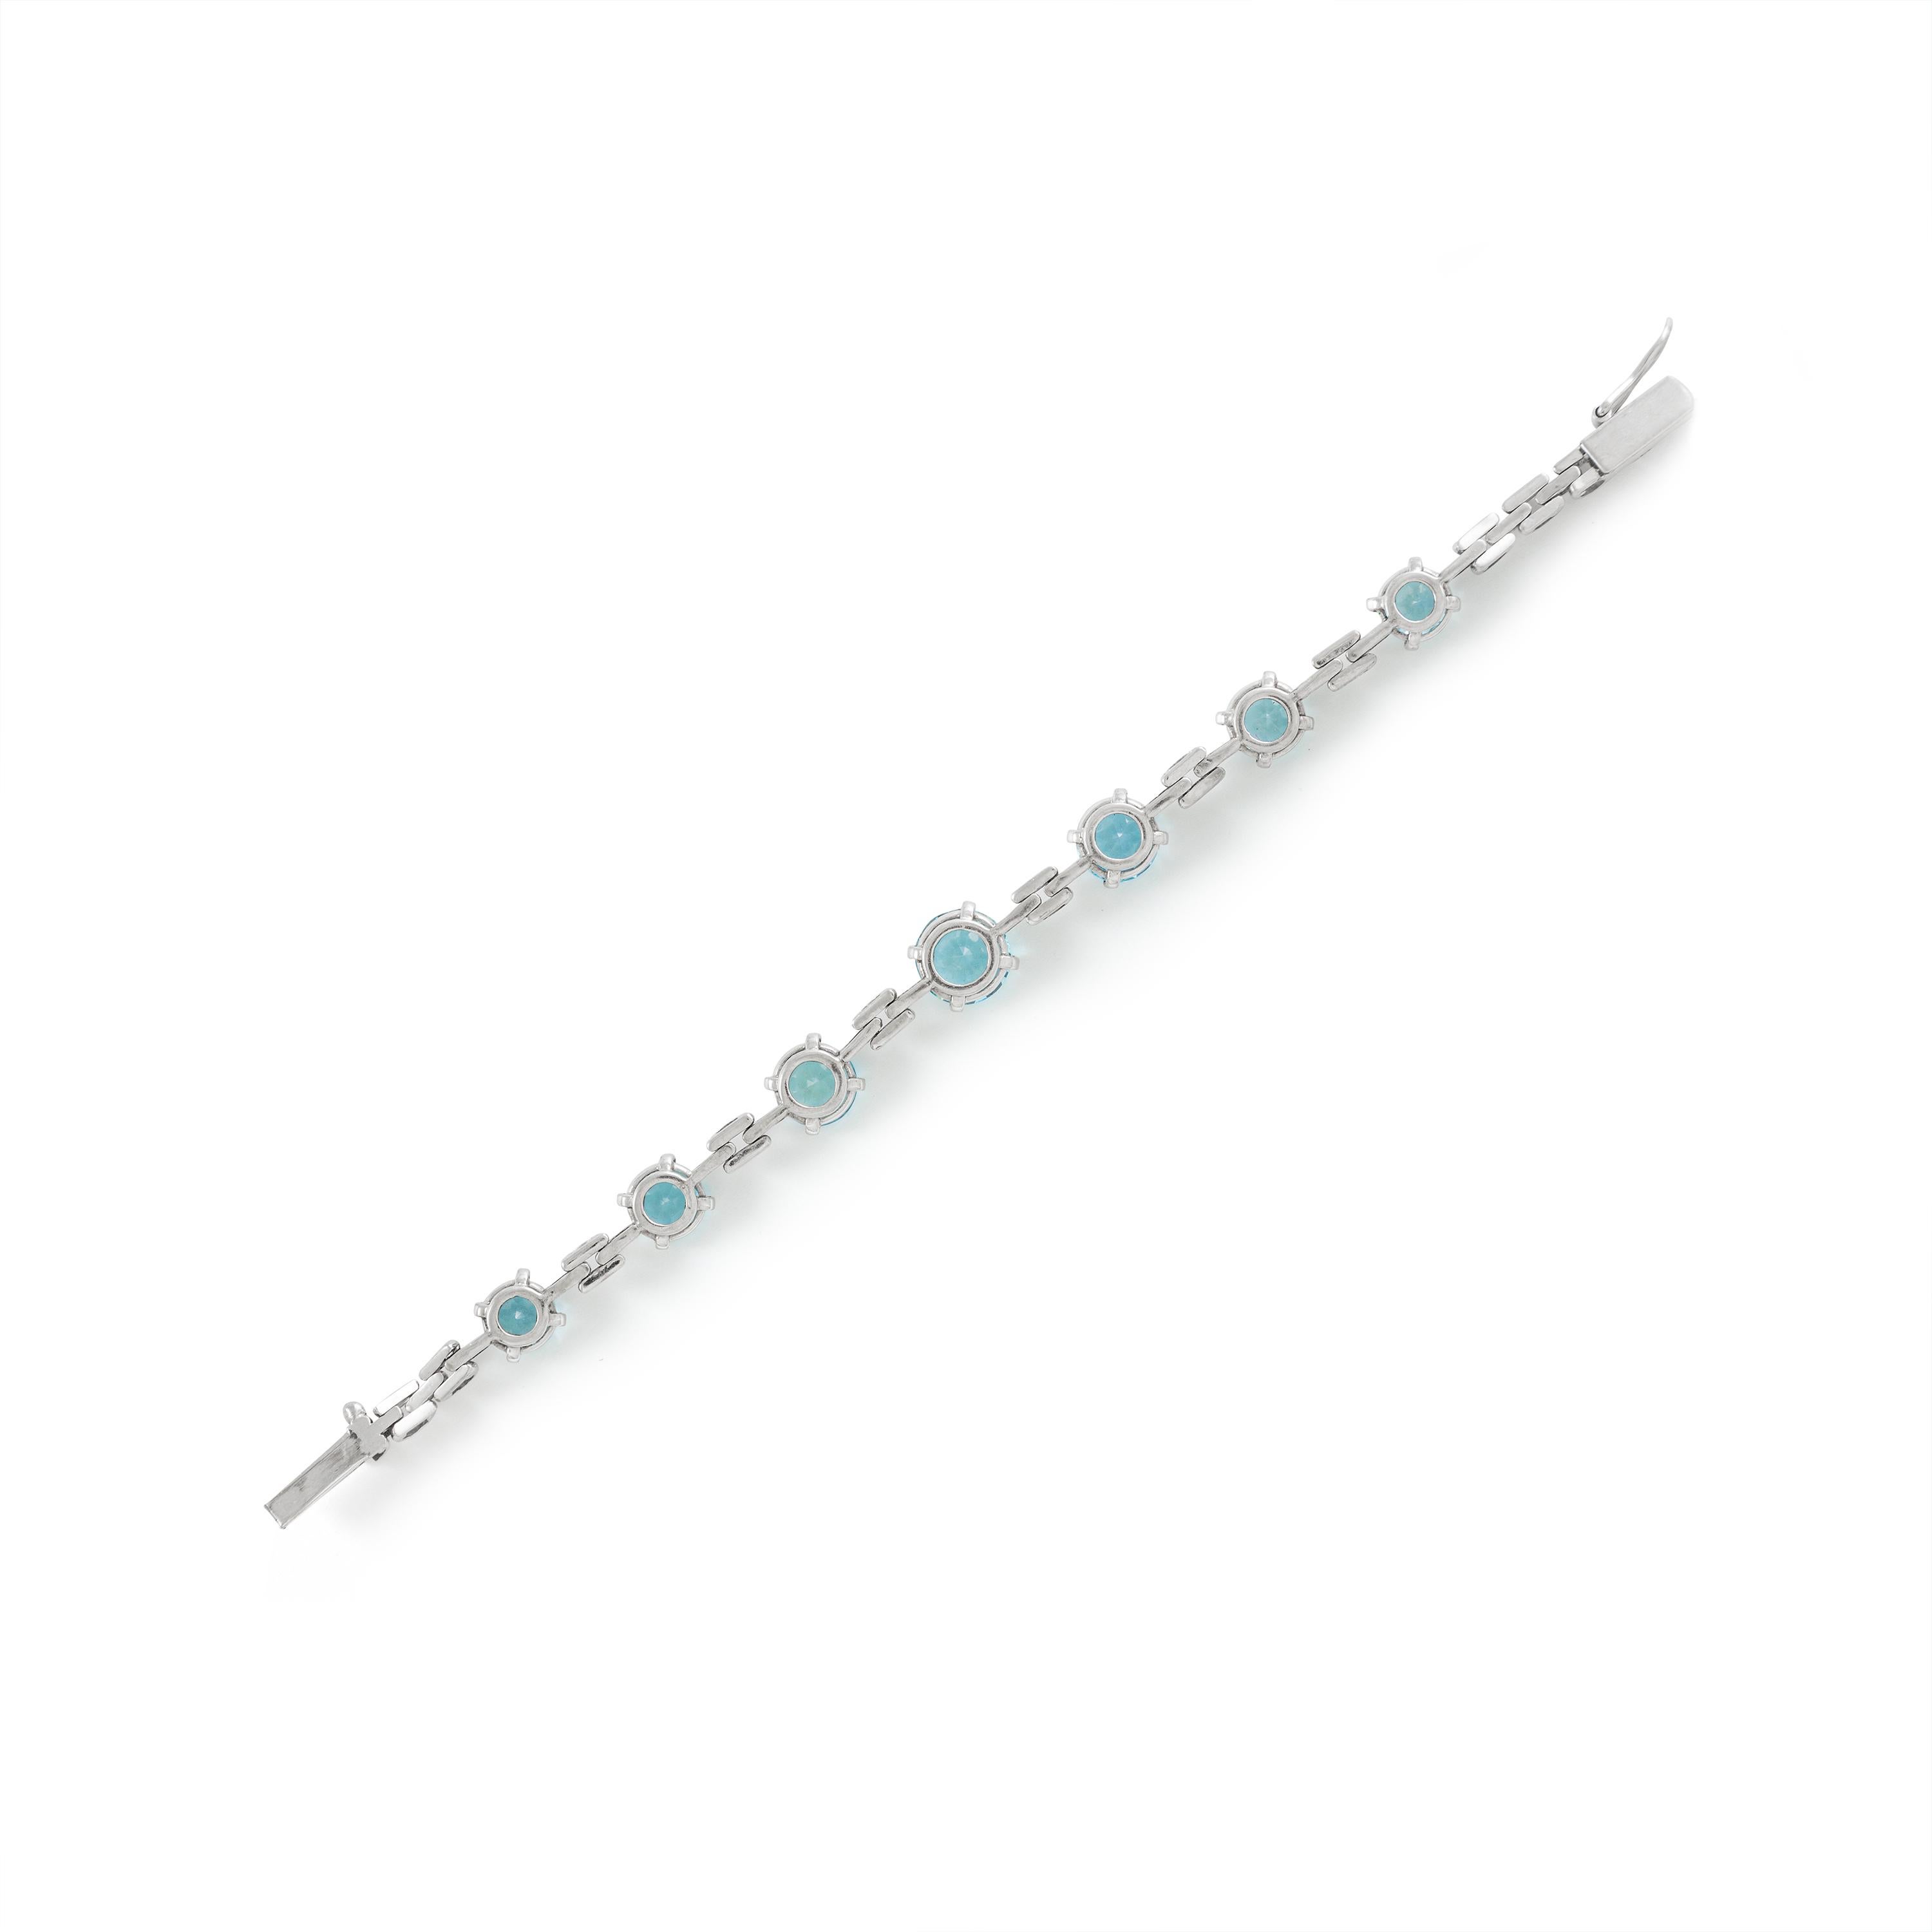 Bracelet set with 7 round cut Aquamarine
Length: approximately 17.50 centimeters.
Width: 0.50 up to 1.00 centimeters.

Weight: 17.56 grams
